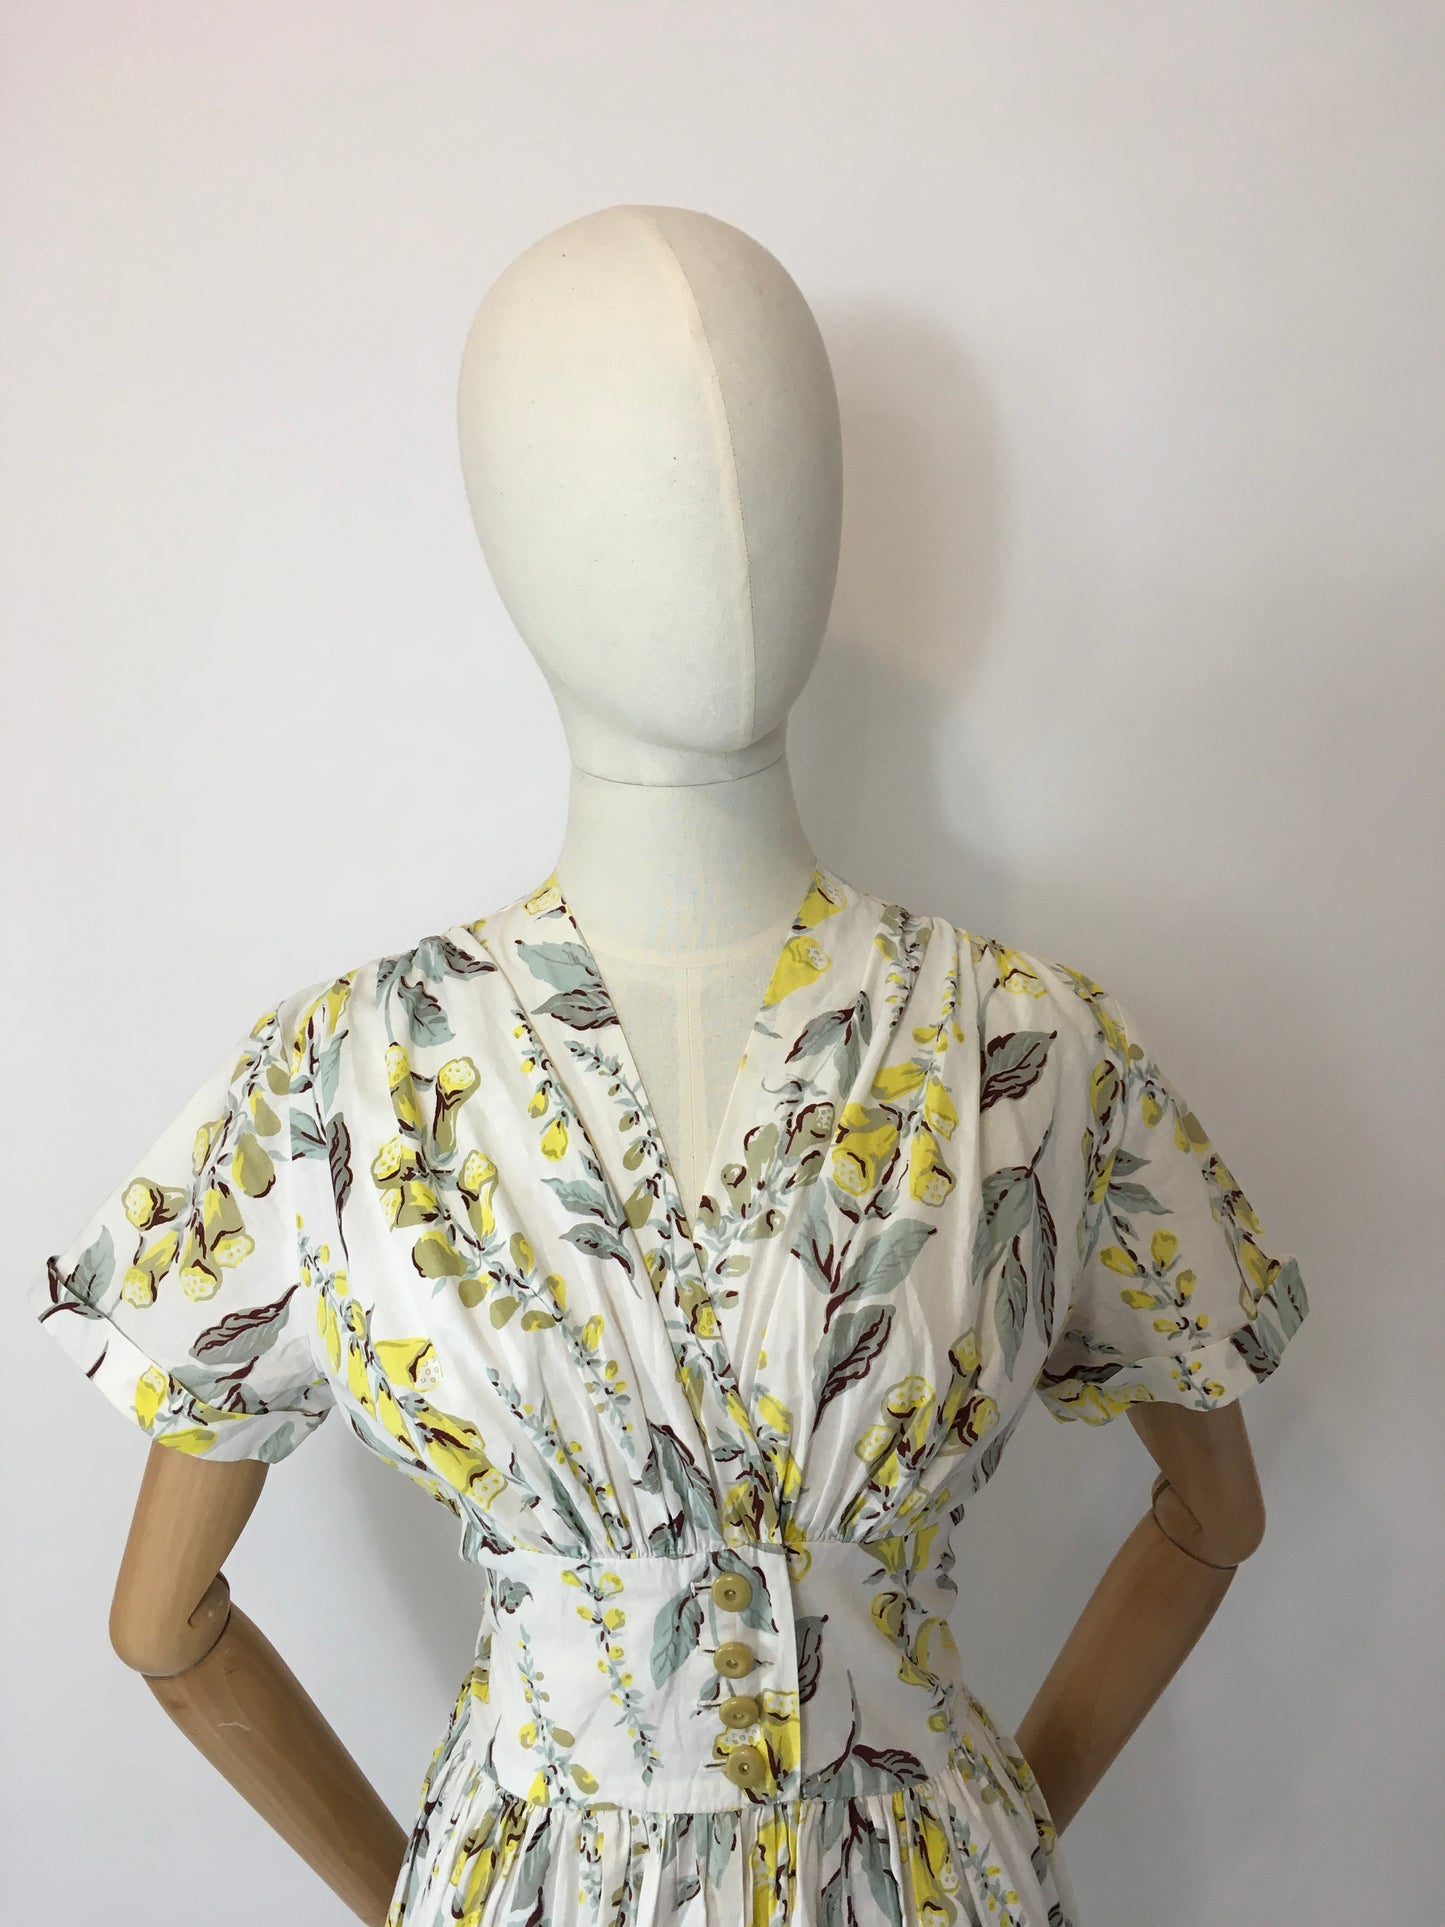 Original 1950s Floral Day Dress - In the Most Beautiful Colour Palette of Buttery Yellows and Mint Greens